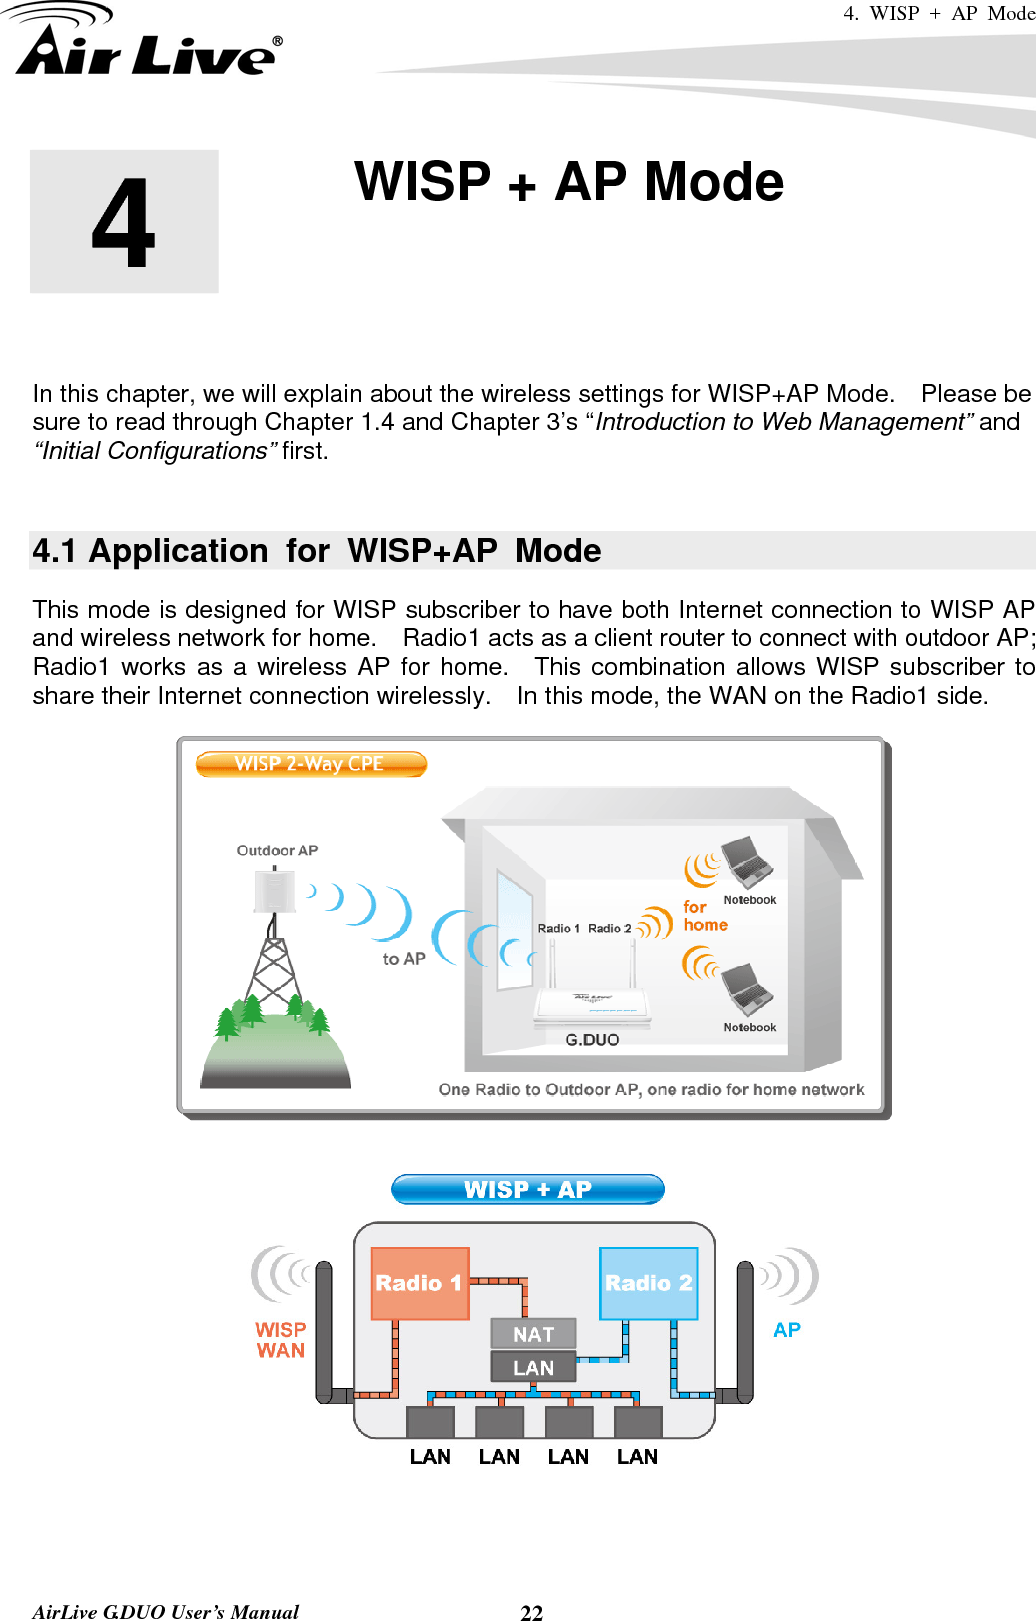 4. WISP + AP Mode   AirLive G.DUO User’s Manual  22        In this chapter, we will explain about the wireless settings for WISP+AP Mode.    Please be sure to read through Chapter 1.4 and Chapter 3’s “Introduction to Web Management” and “Initial Configurations” first.    4.1 Application for WISP+AP Mode This mode is designed for WISP subscriber to have both Internet connection to WISP AP and wireless network for home.    Radio1 acts as a client router to connect with outdoor AP; Radio1 works as a wireless AP for home.  This combination allows WISP subscriber to share their Internet connection wirelessly.    In this mode, the WAN on the Radio1 side.      4  4. WISP + AP Mode  